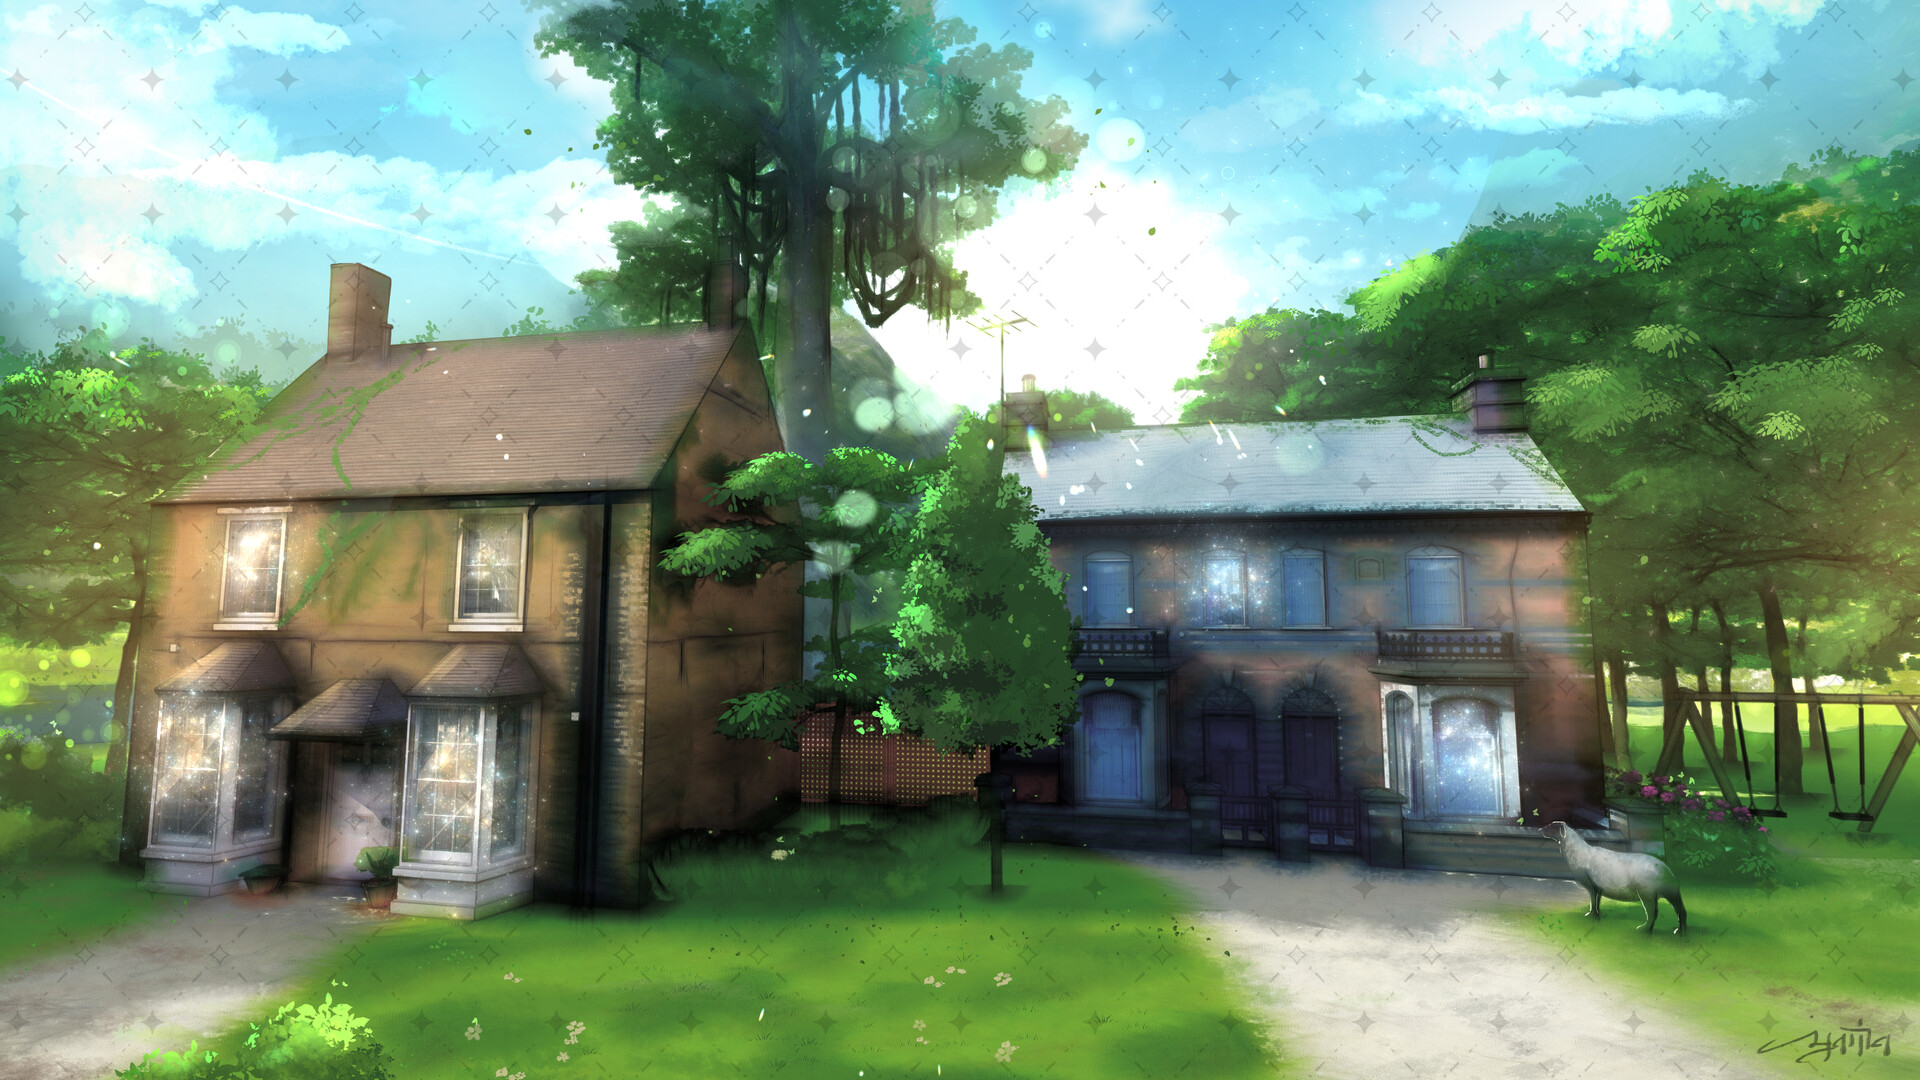 LOFI Street, Houses, Anime Manga Style Background Wallpaper Design,  Illustration, Generated By AI Stock Photo, Picture and Royalty Free Image.  Image 205960282.